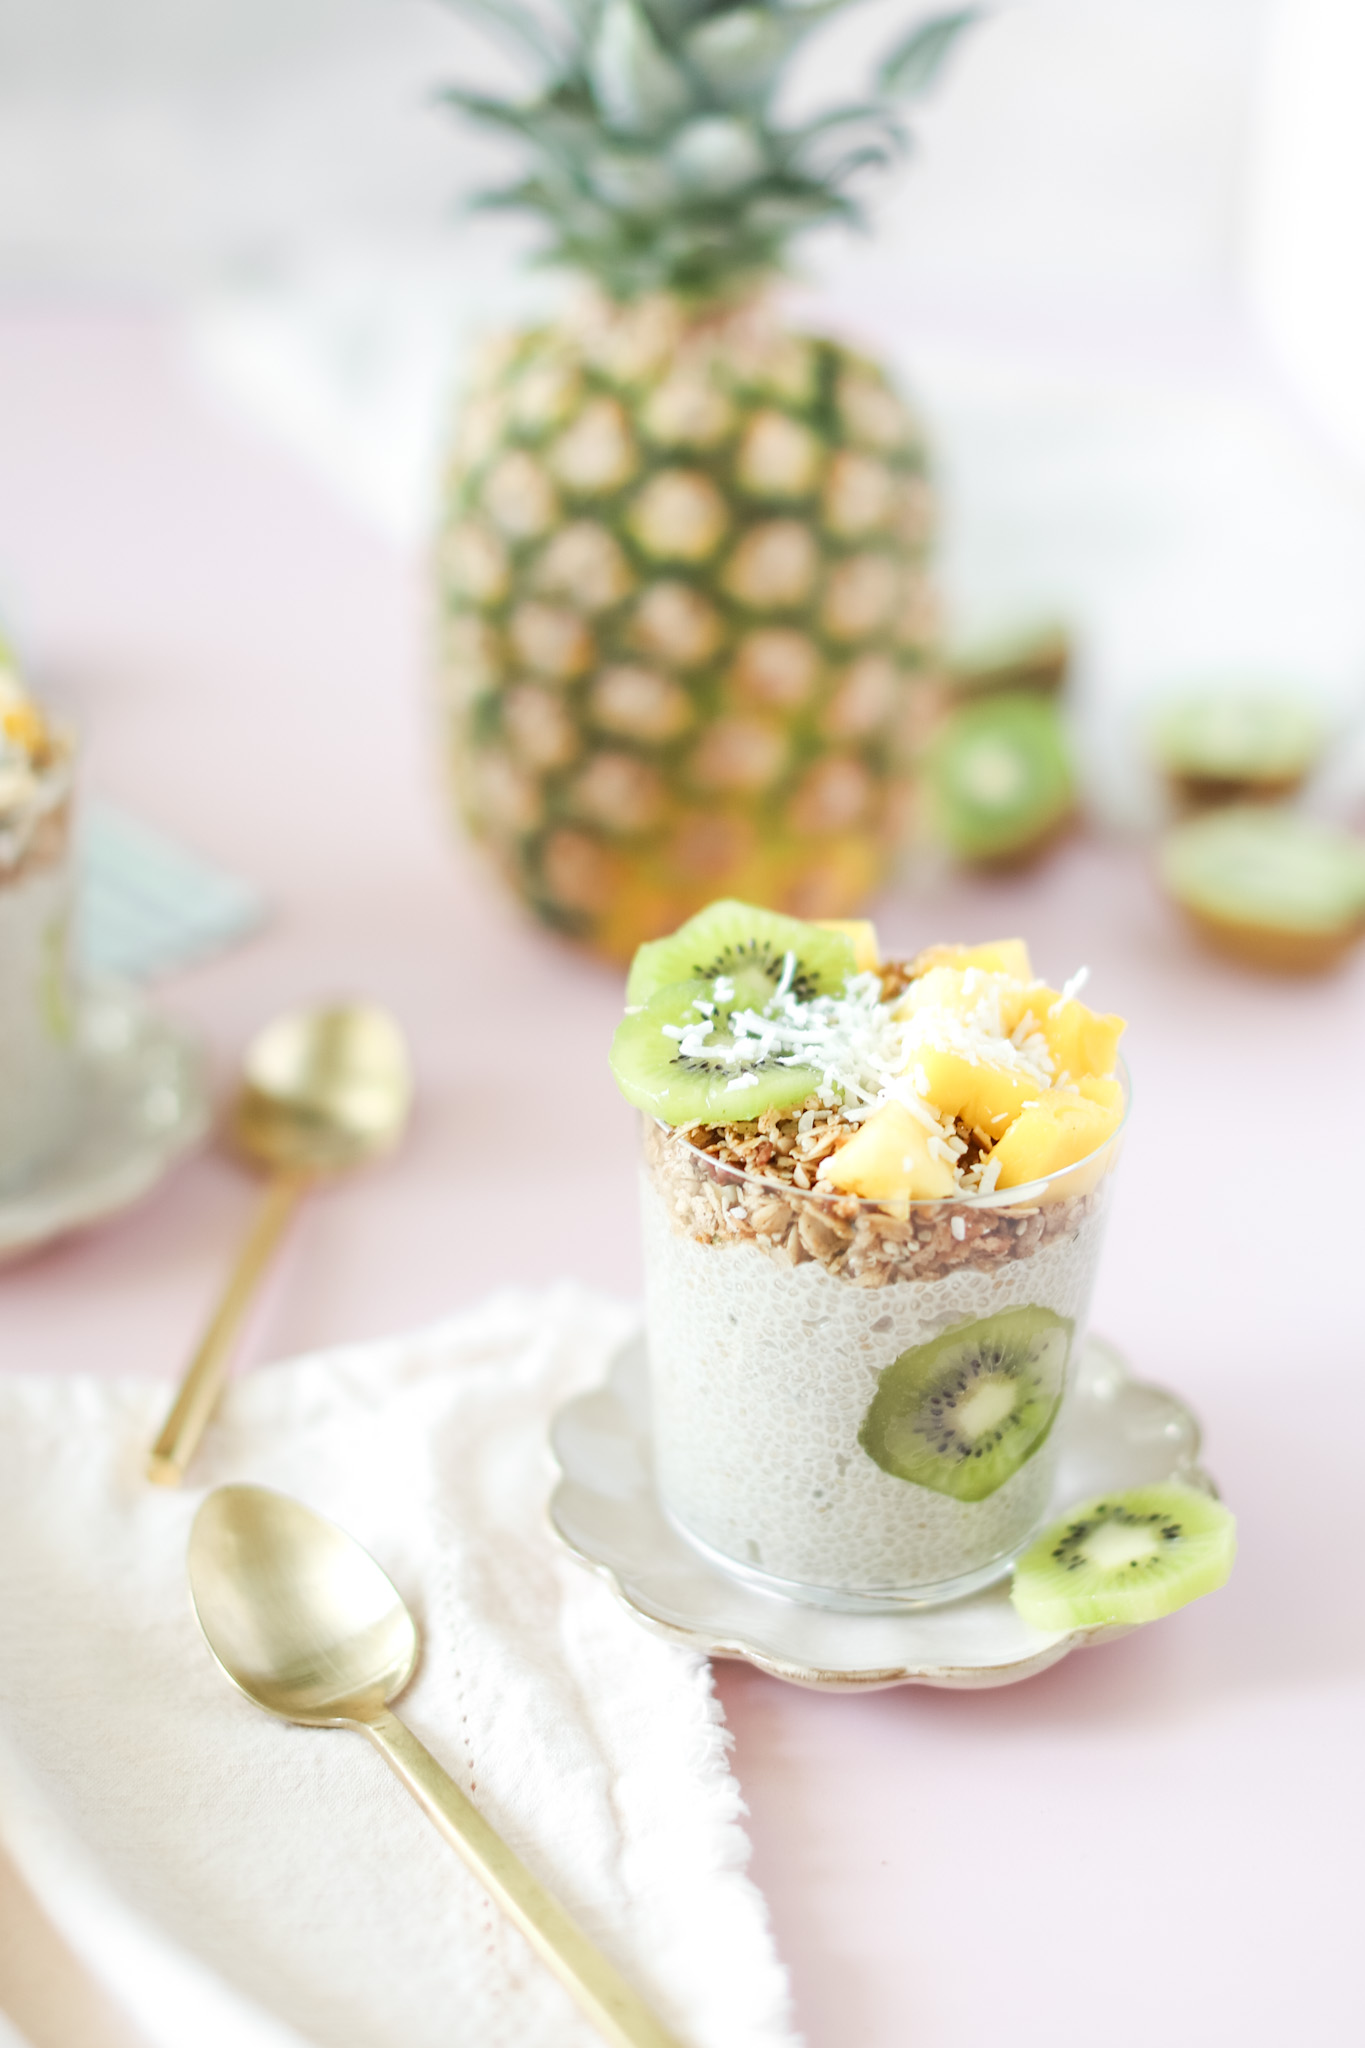 Tropical Chia Pudding with kiwi, pineapple and coconut flakes